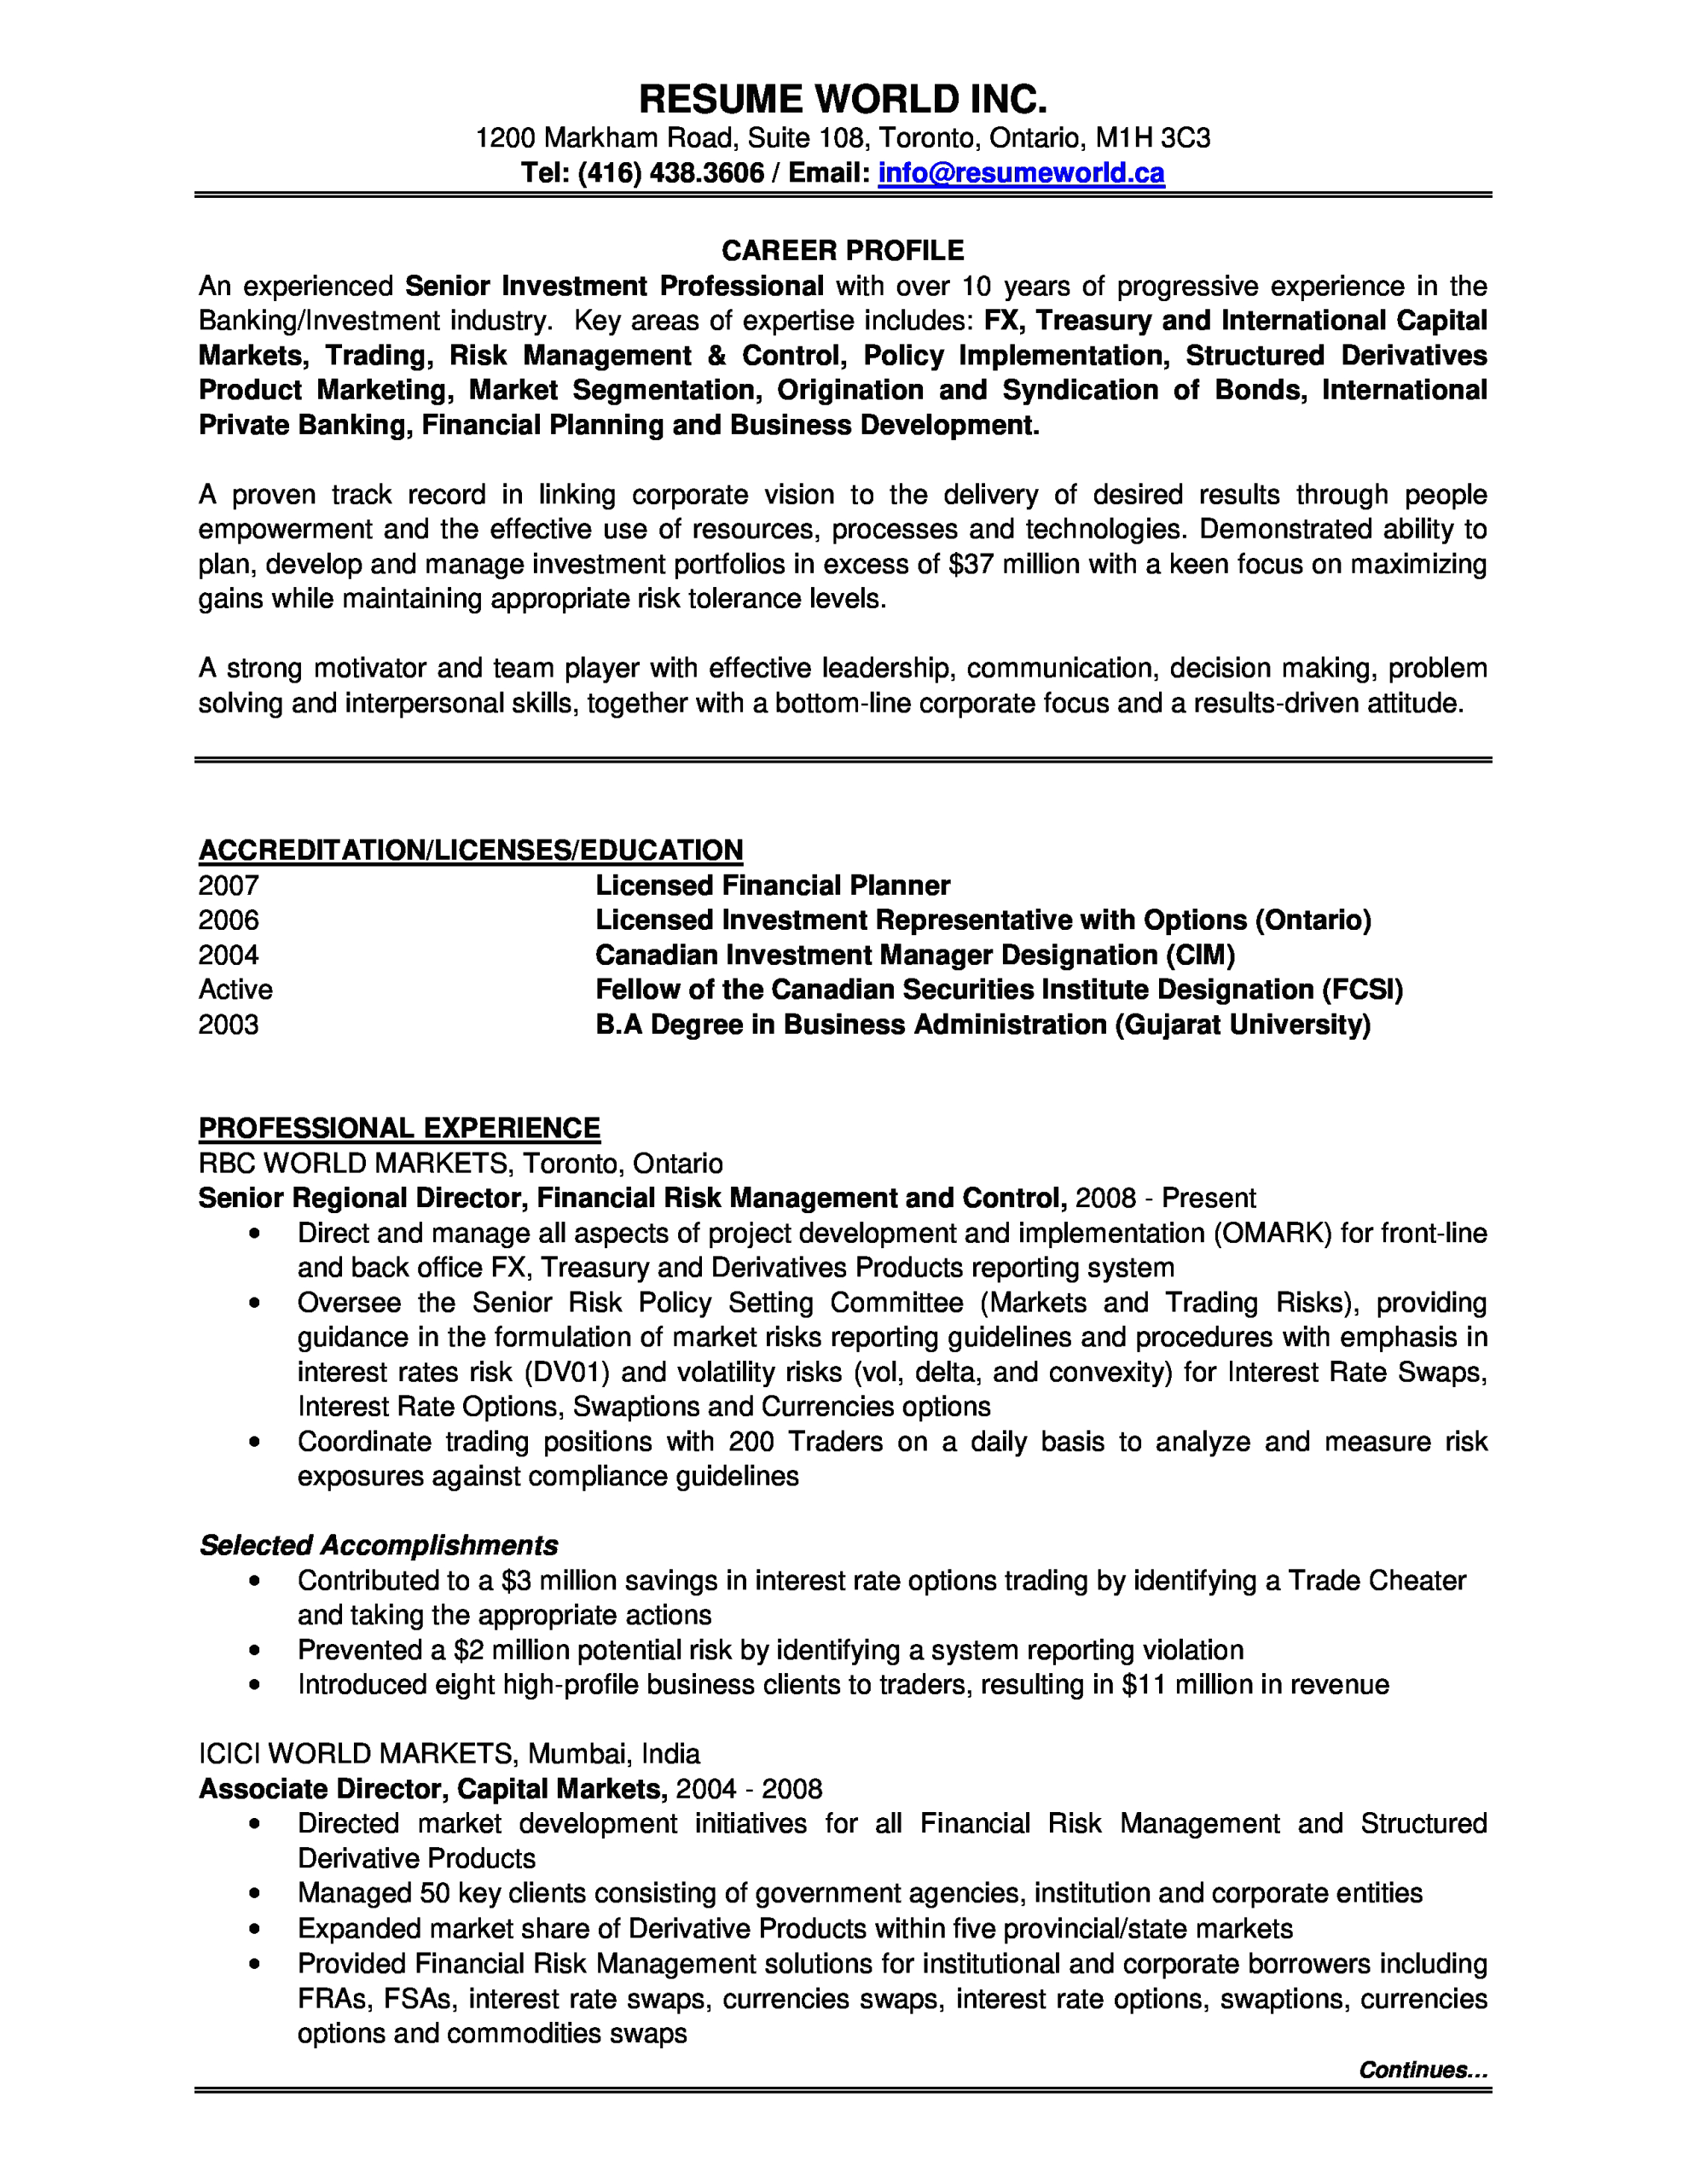 Sample Resumes for Investment Banking Operations Investment Banking Resume Examples Karoosha